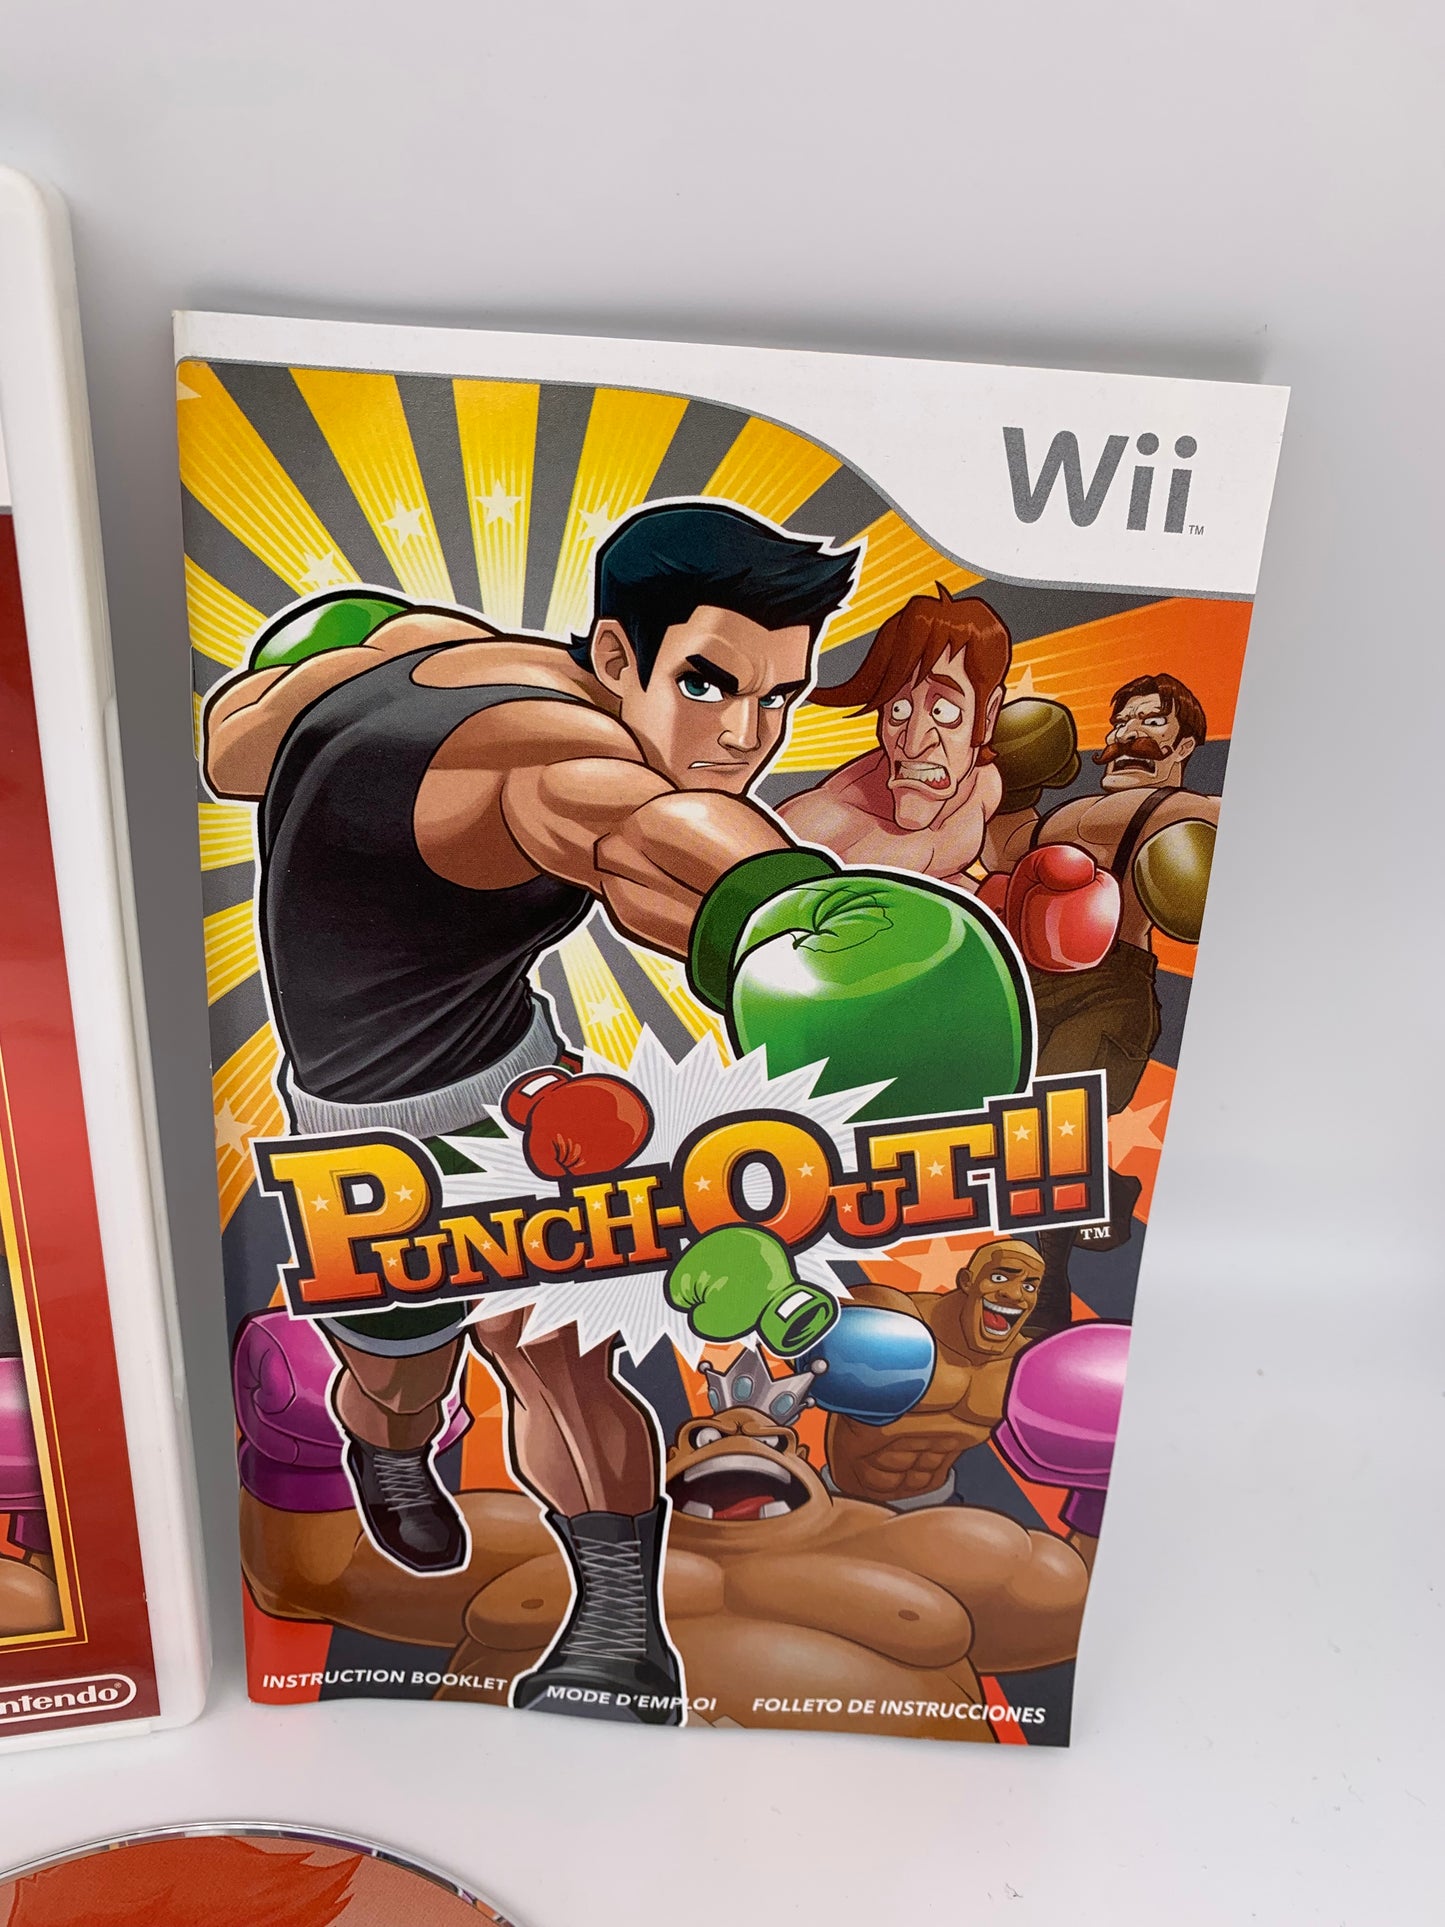 NiNTENDO Wii | PUNCH-OUT | NiNTENDO SELECTS